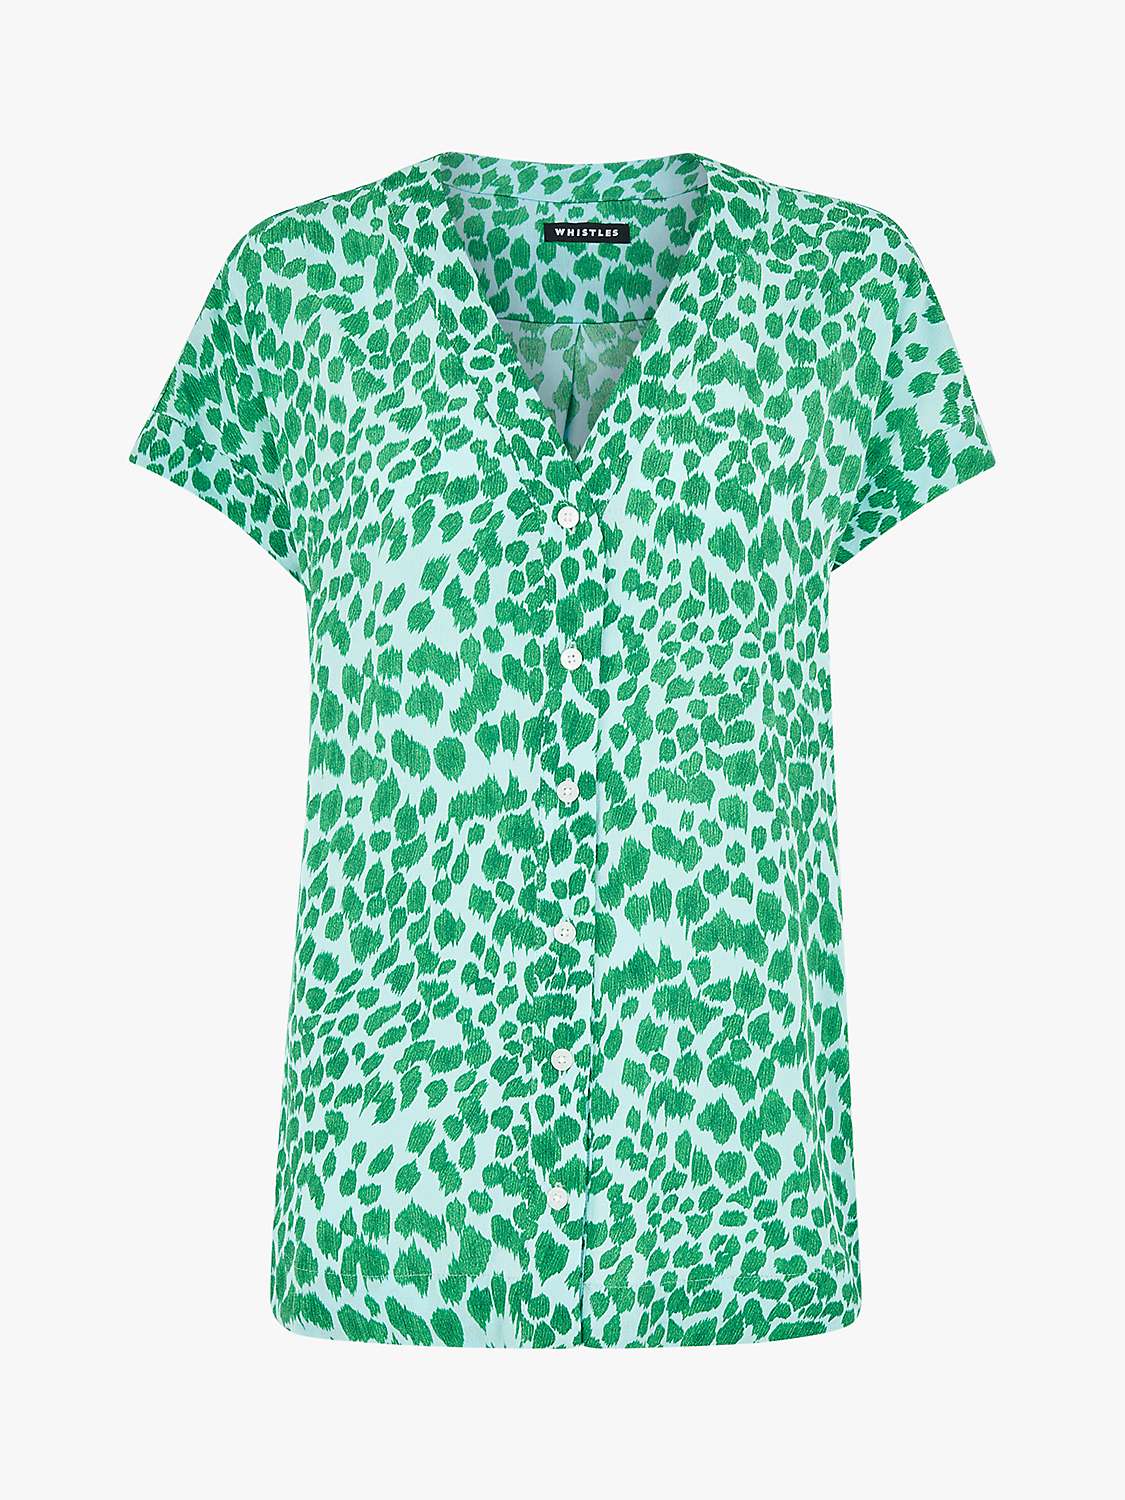 Whistles Smooth Leopard Print Blouse, Green/Multi at John Lewis & Partners